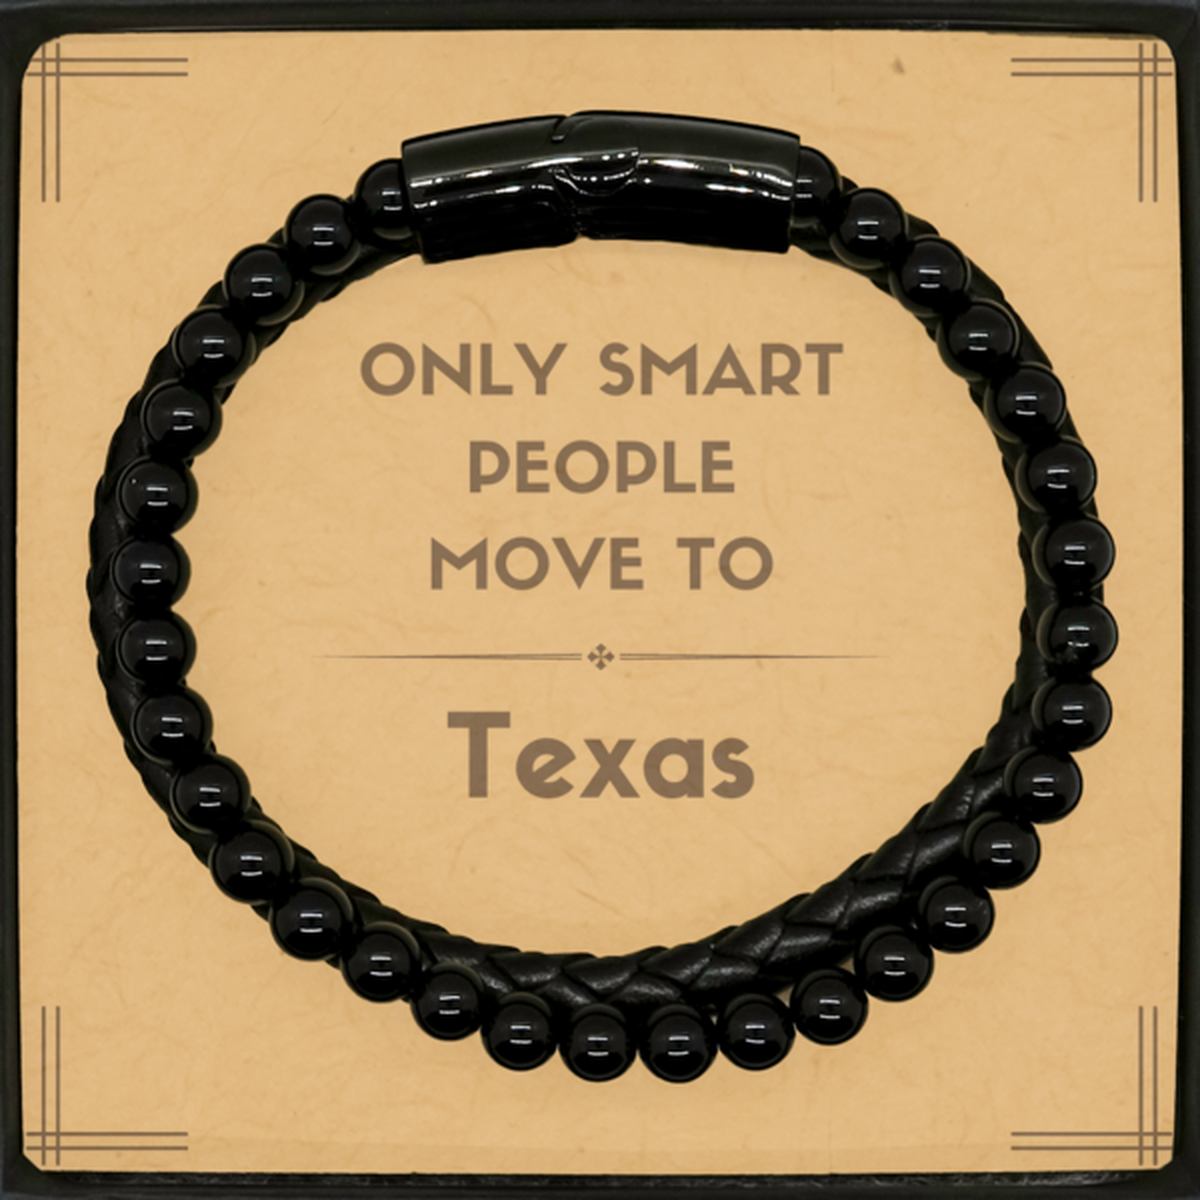 Only smart people move to Texas Stone Leather Bracelets, Message Card Gifts For Texas, Move to Texas Gifts for Friends Coworker Funny Saying Quote